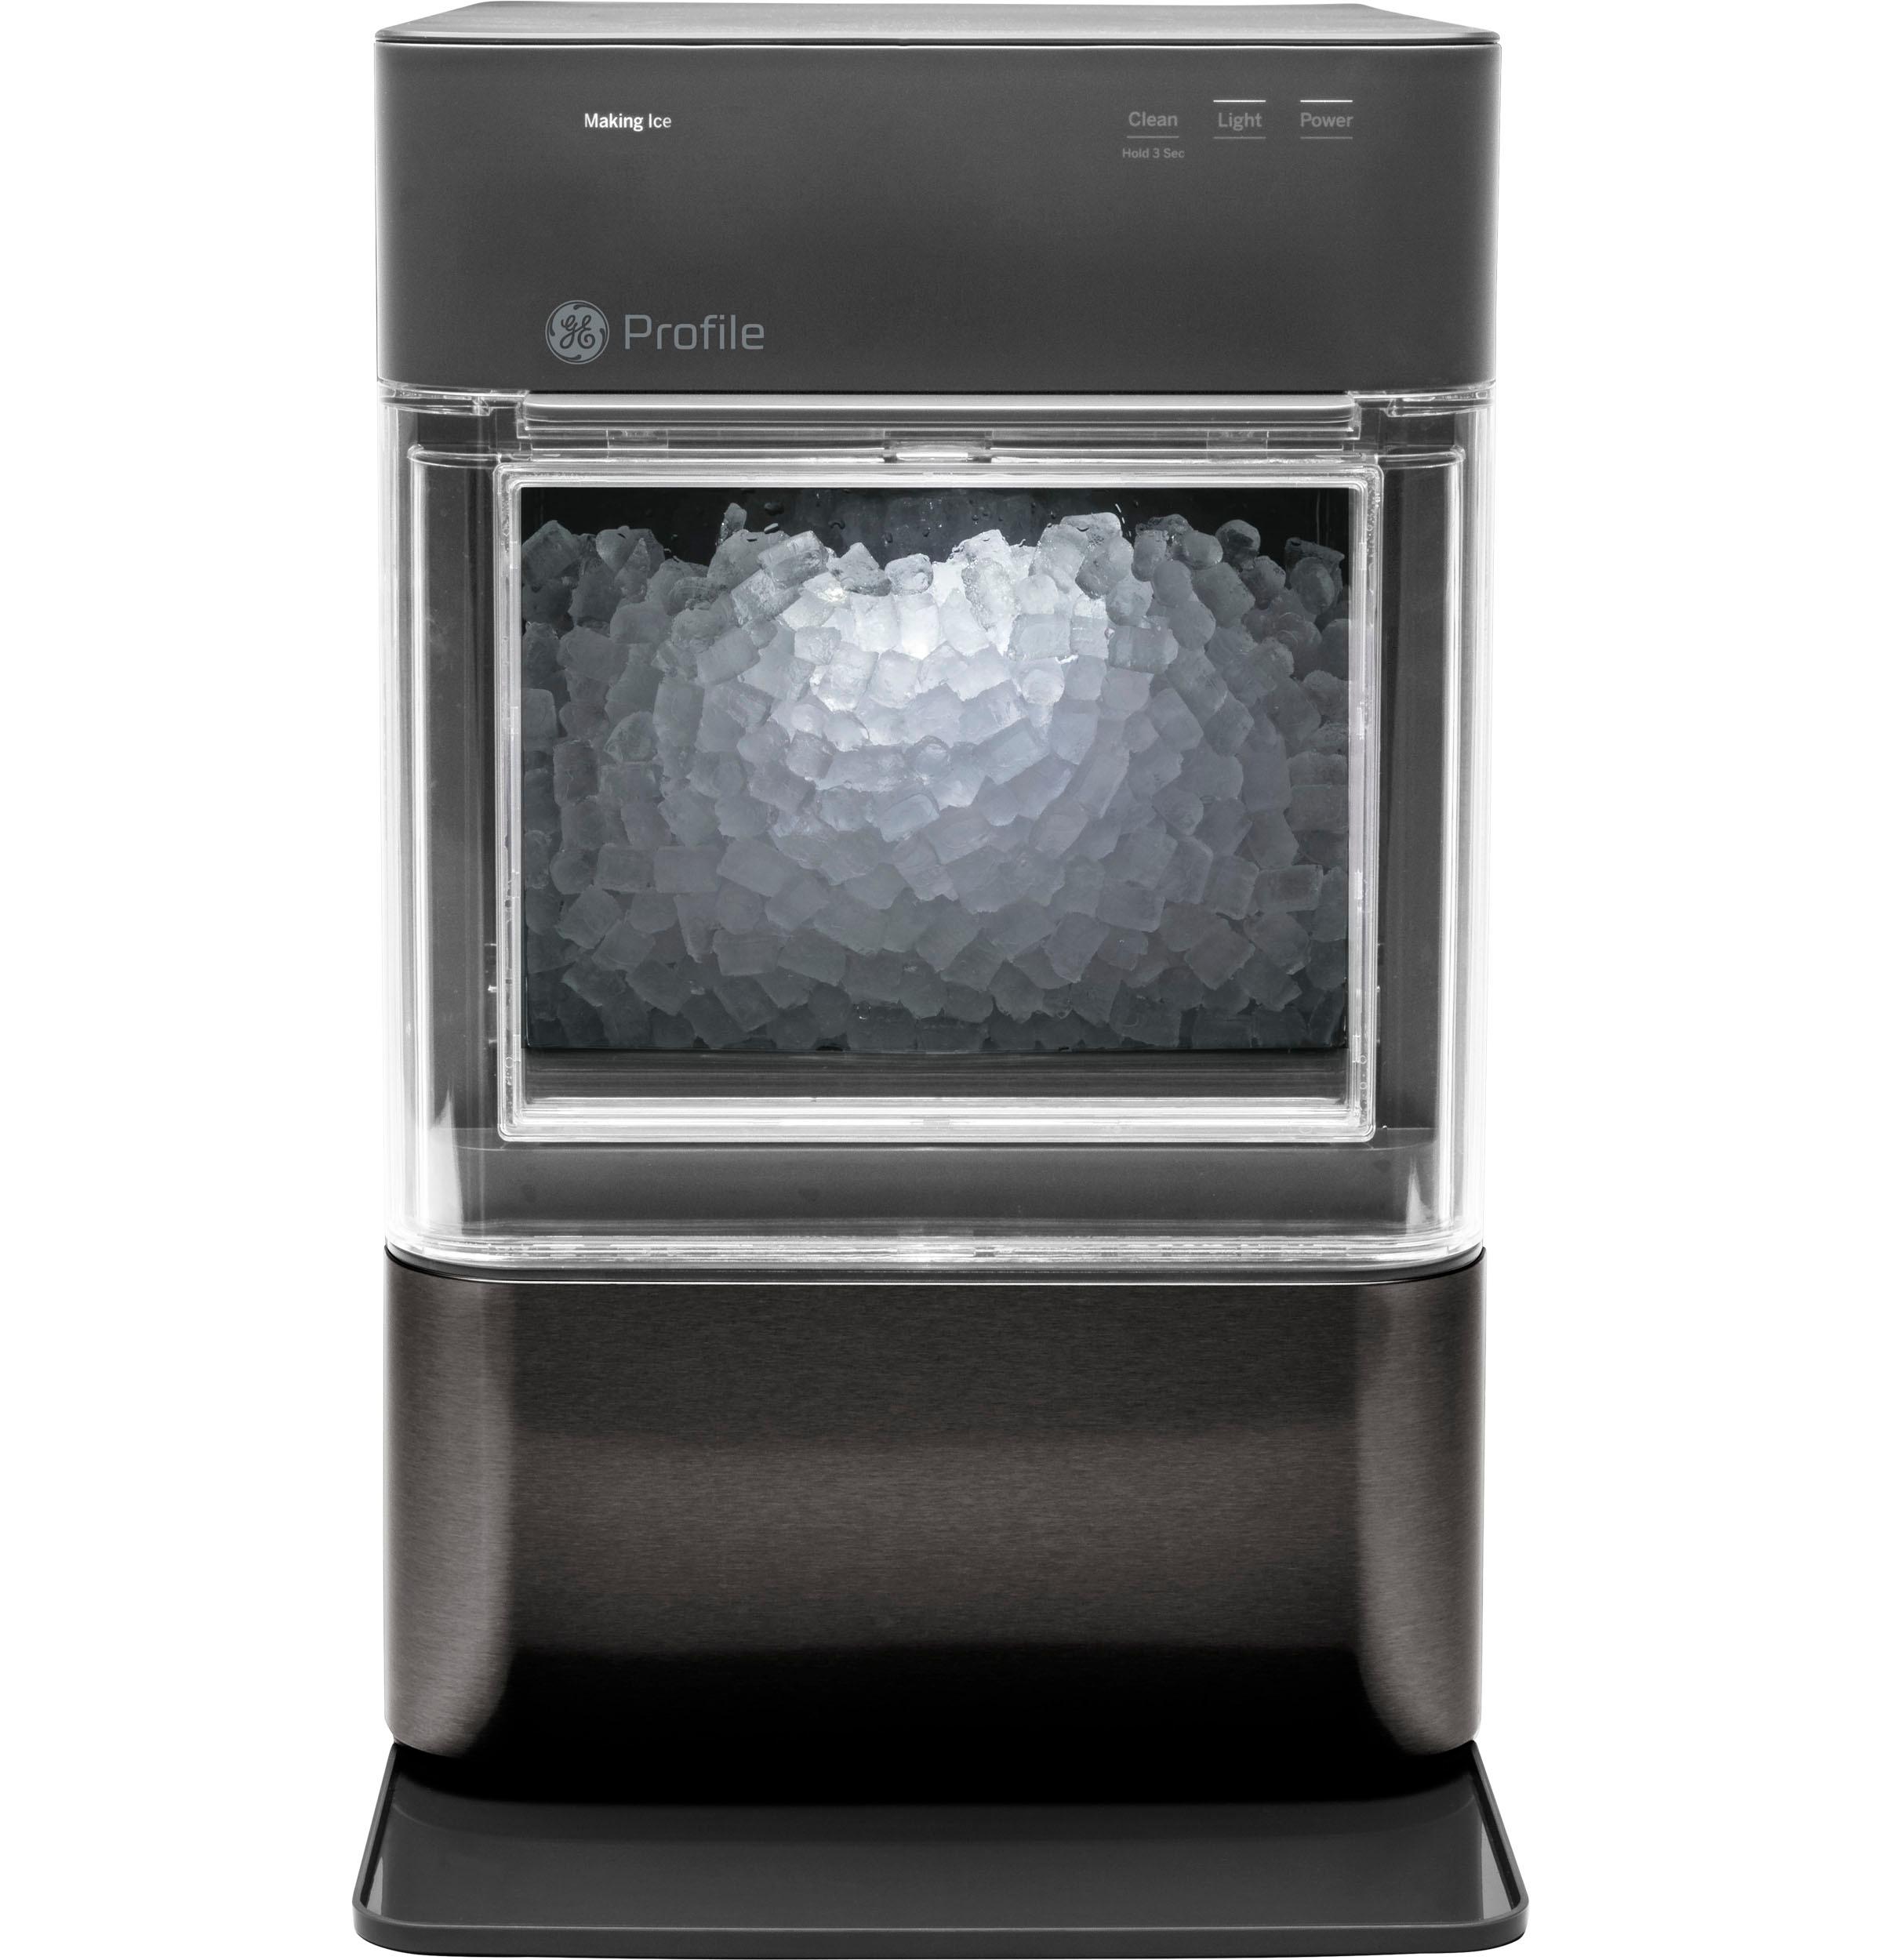 Get The Good Ice With GE Profile Opal Nugget Ice Maker